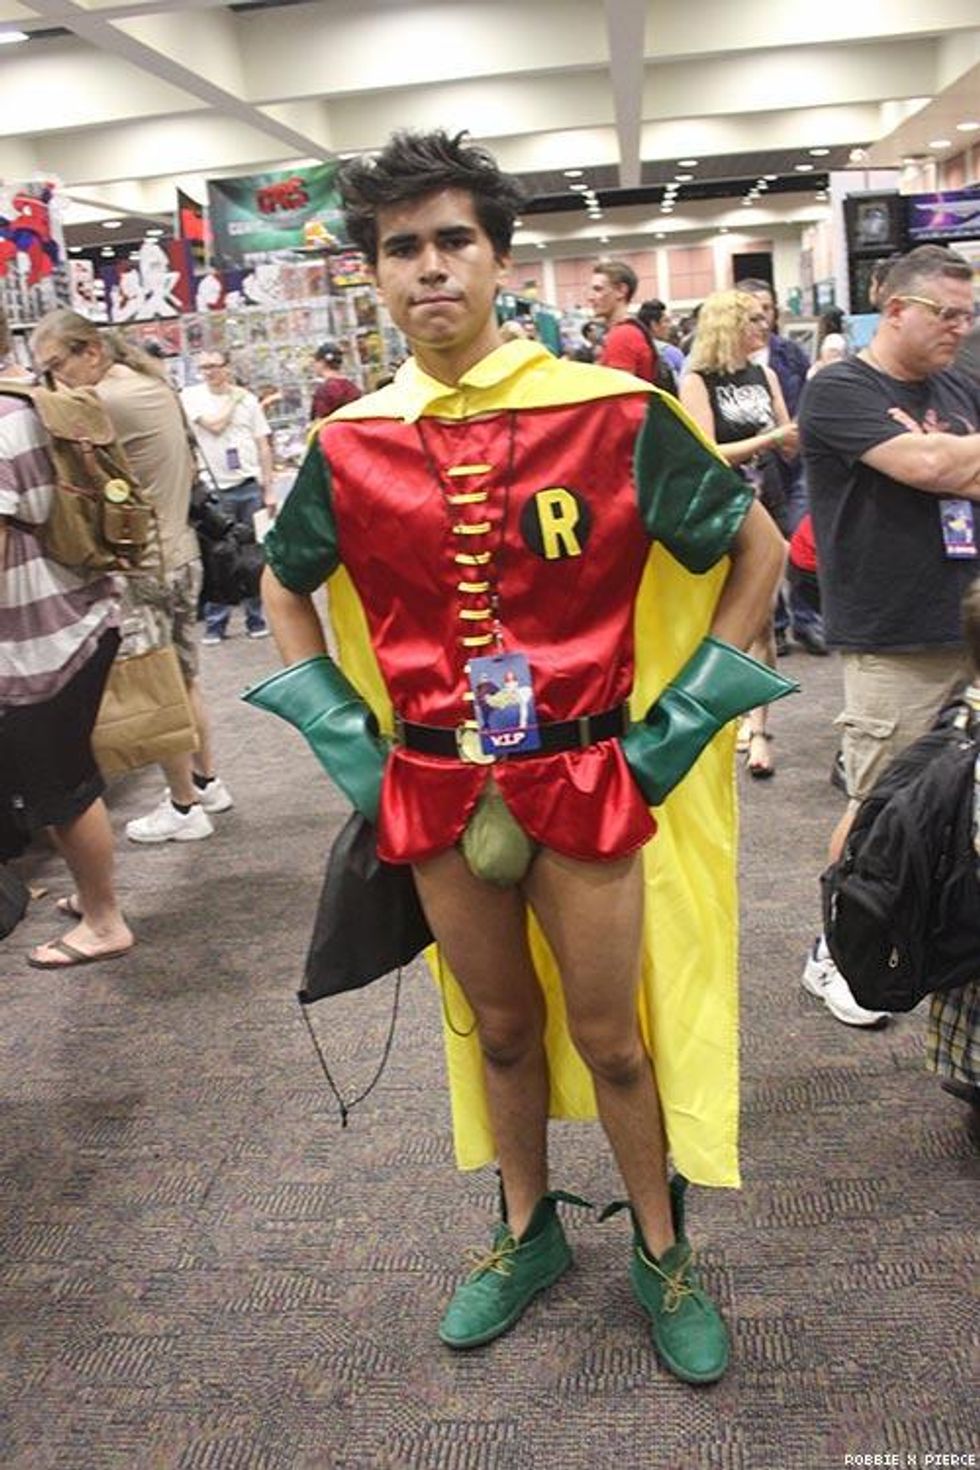 31 Pics of Sweaty Attendees at Palm Springs Comic Con